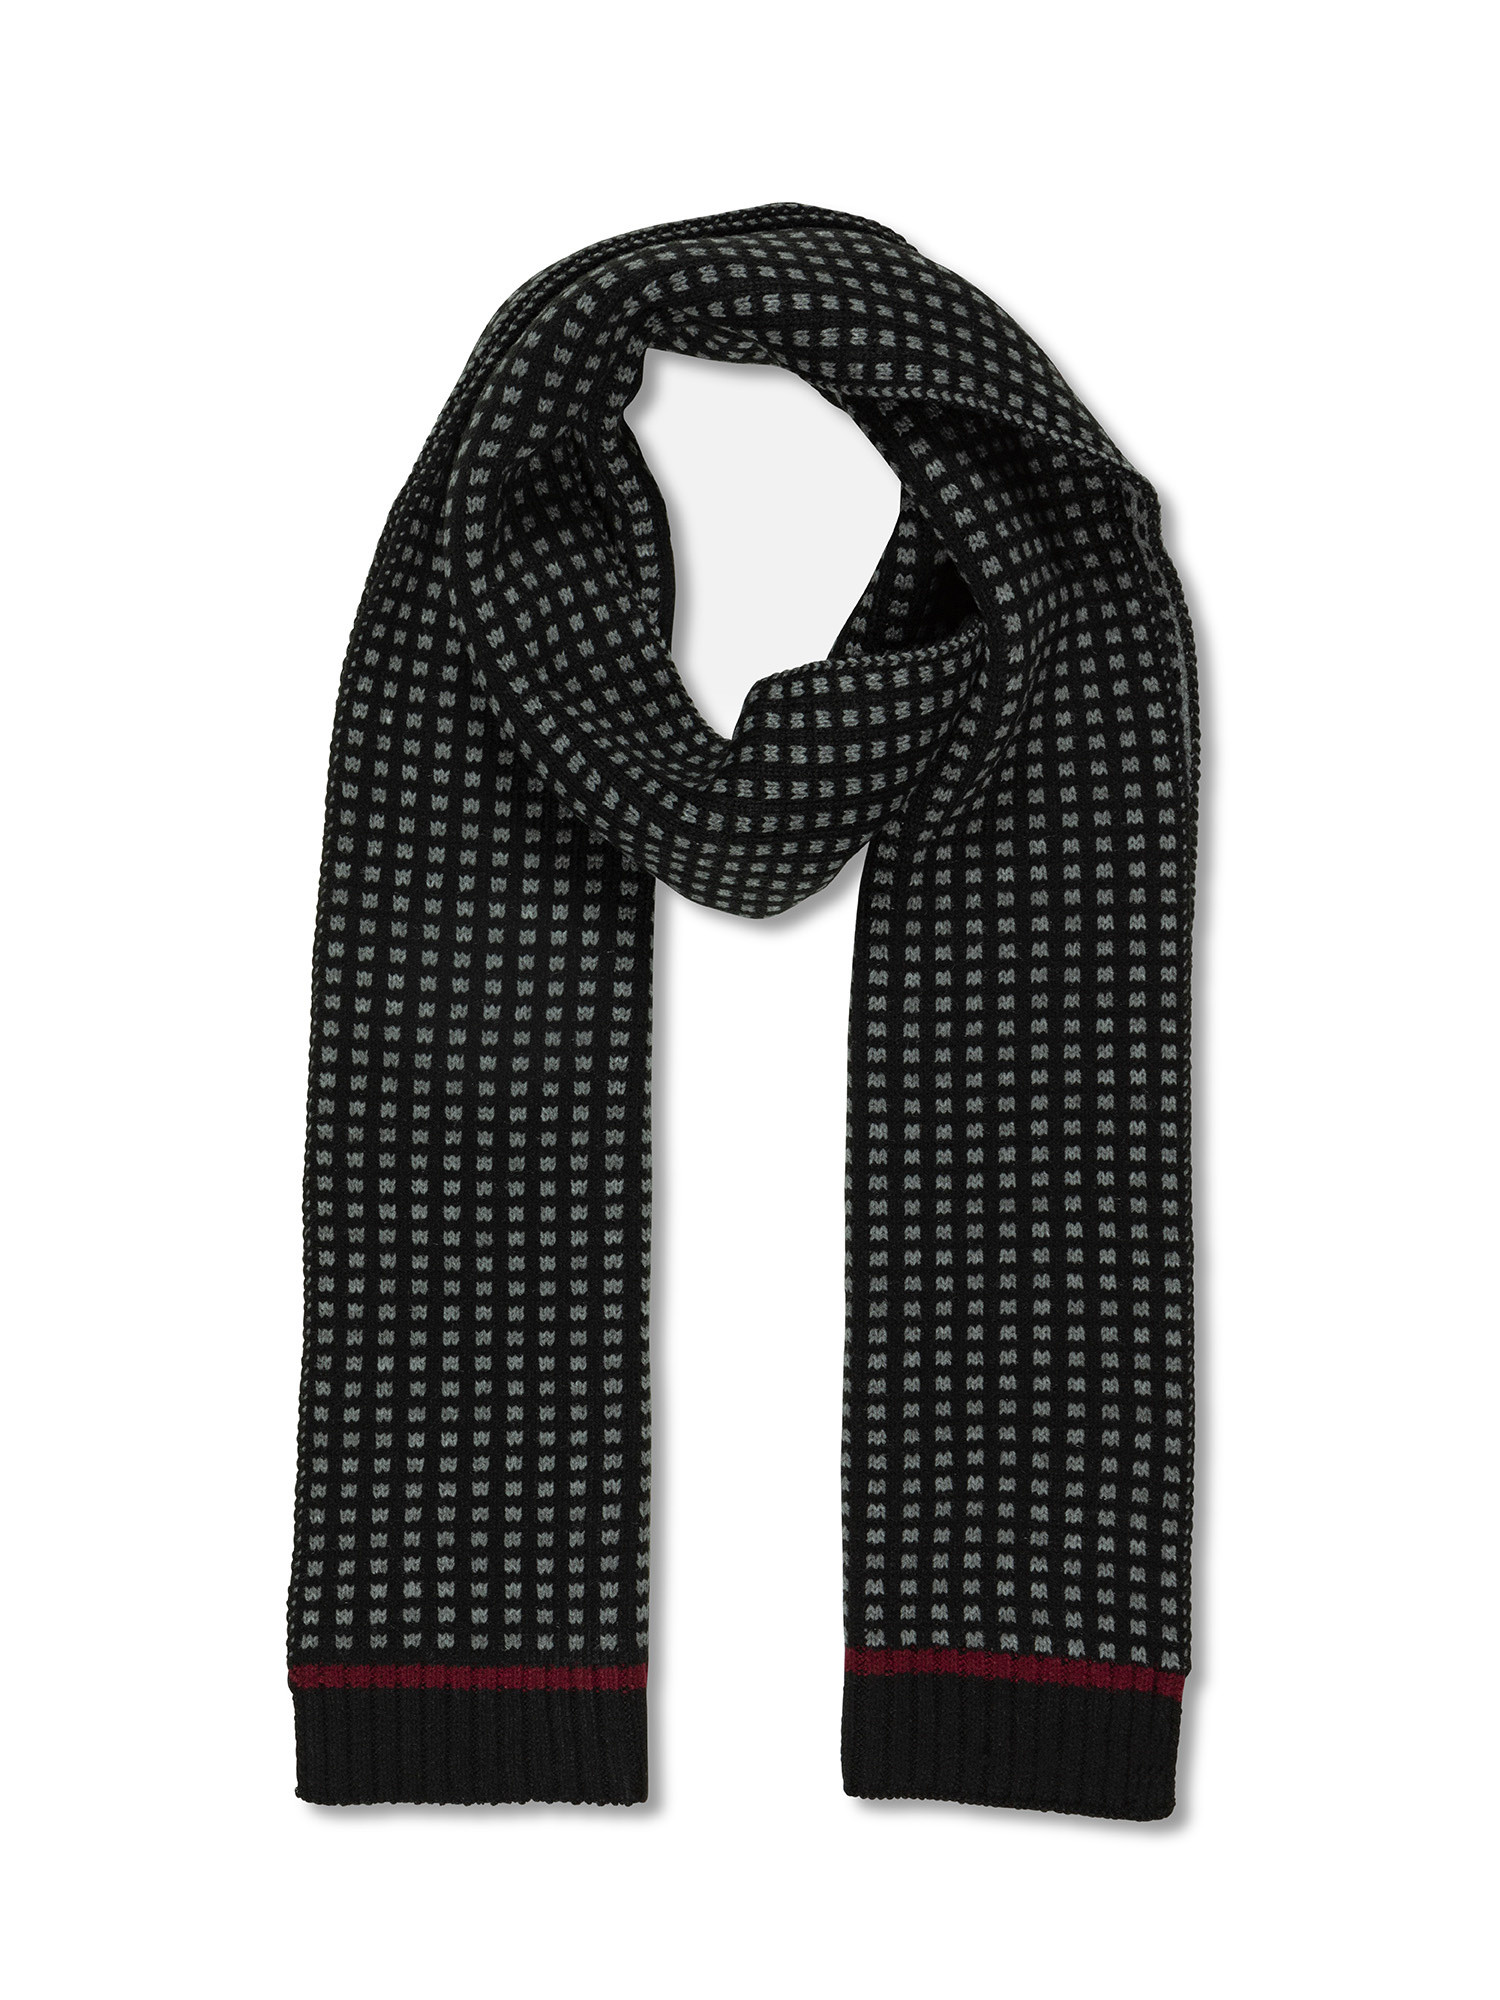 Luca D'Altieri - Checked scarf, Black, large image number 0